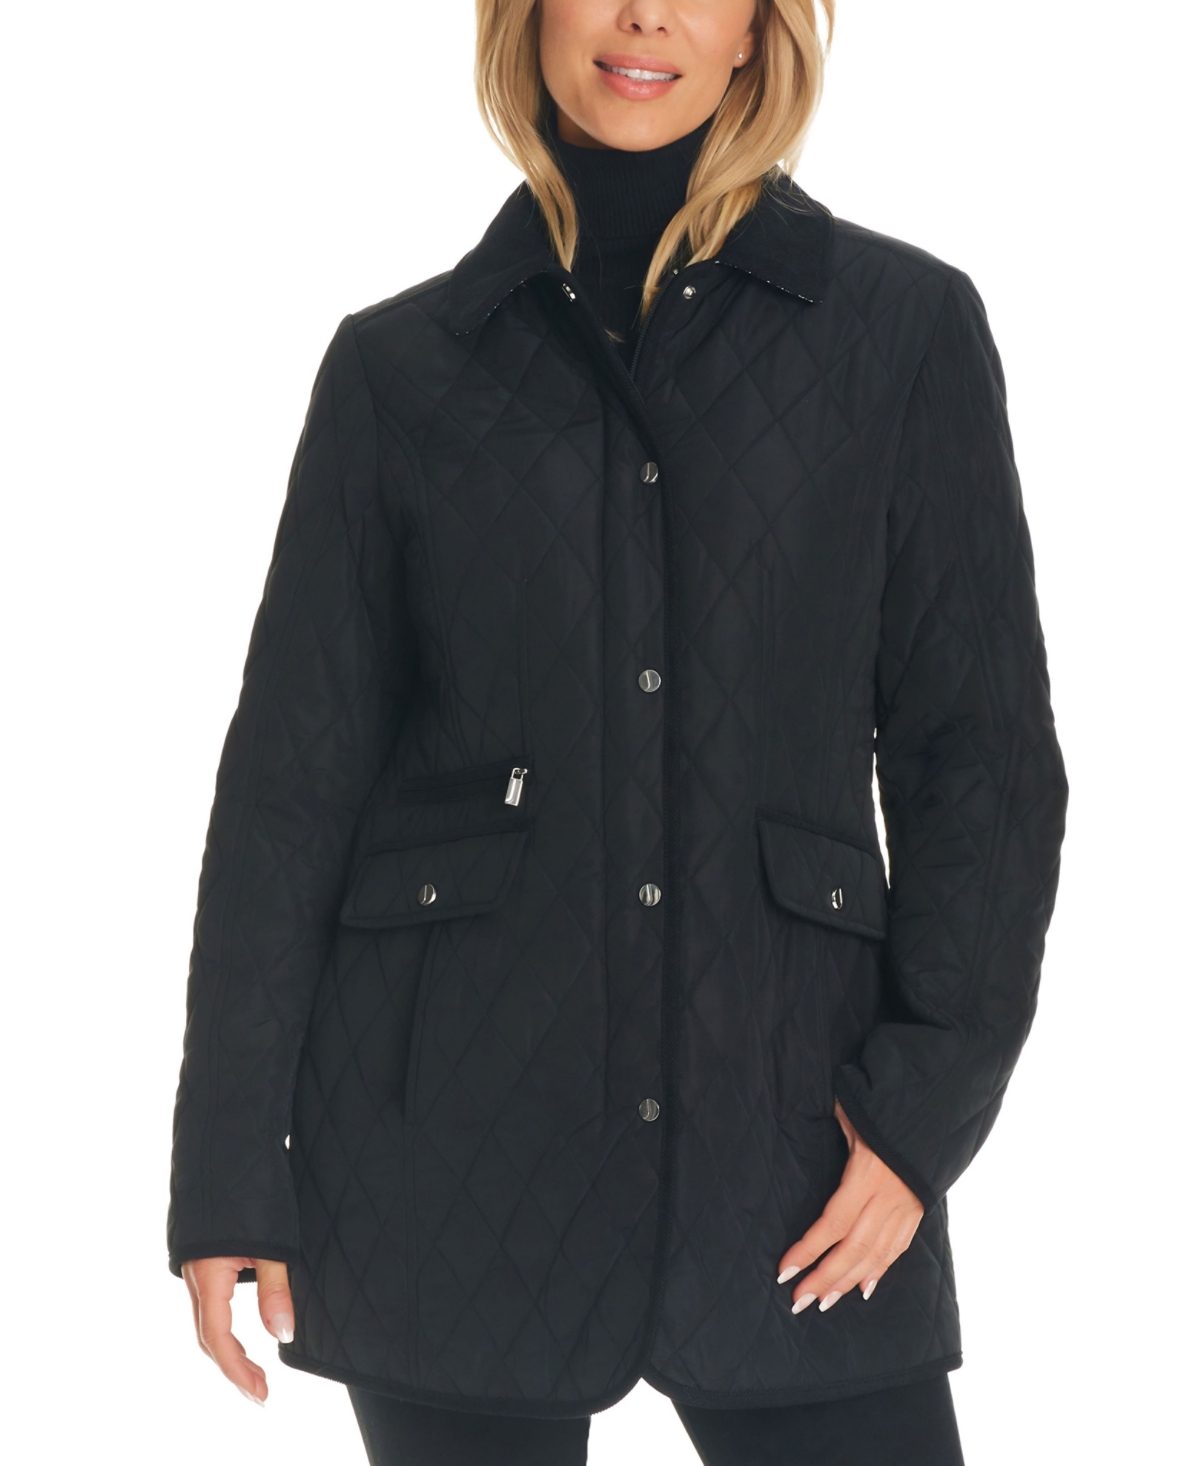 Women's Hooded Quilted Coat - Black